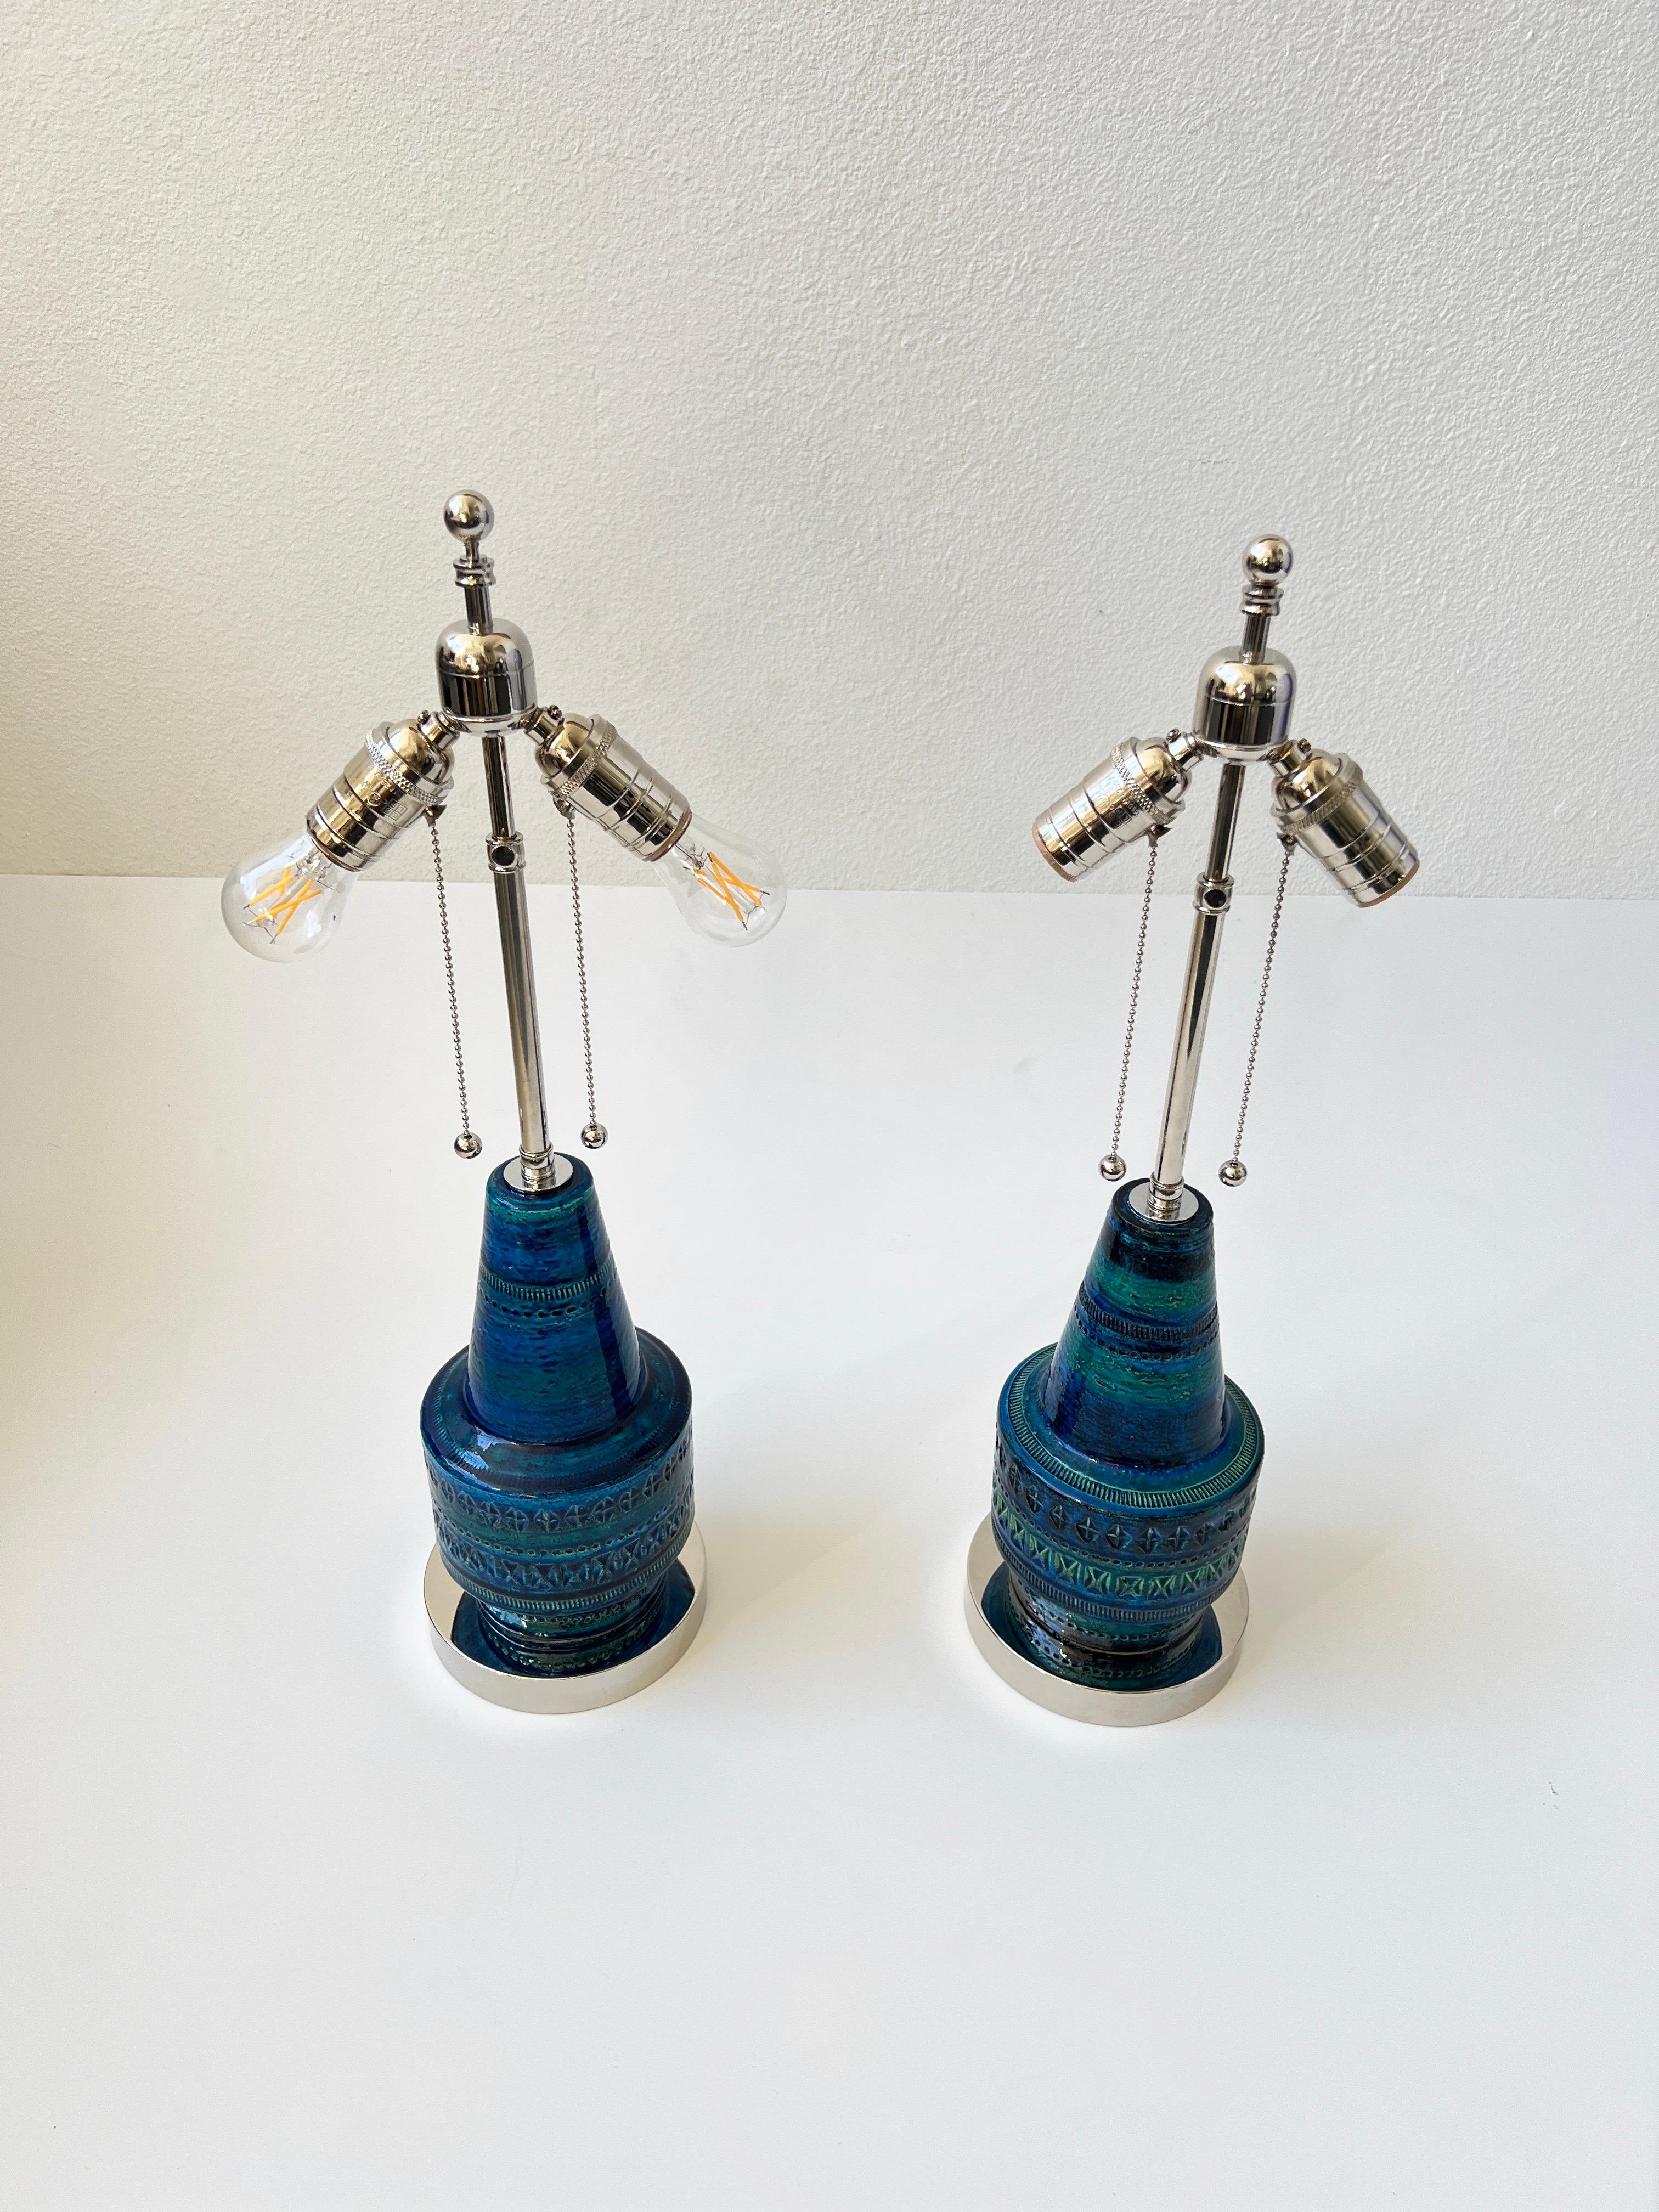 Mid-20th Century Pair of Italian Rimini Blue Ceramic and Chrome Table Lamps by Bitossi For Sale